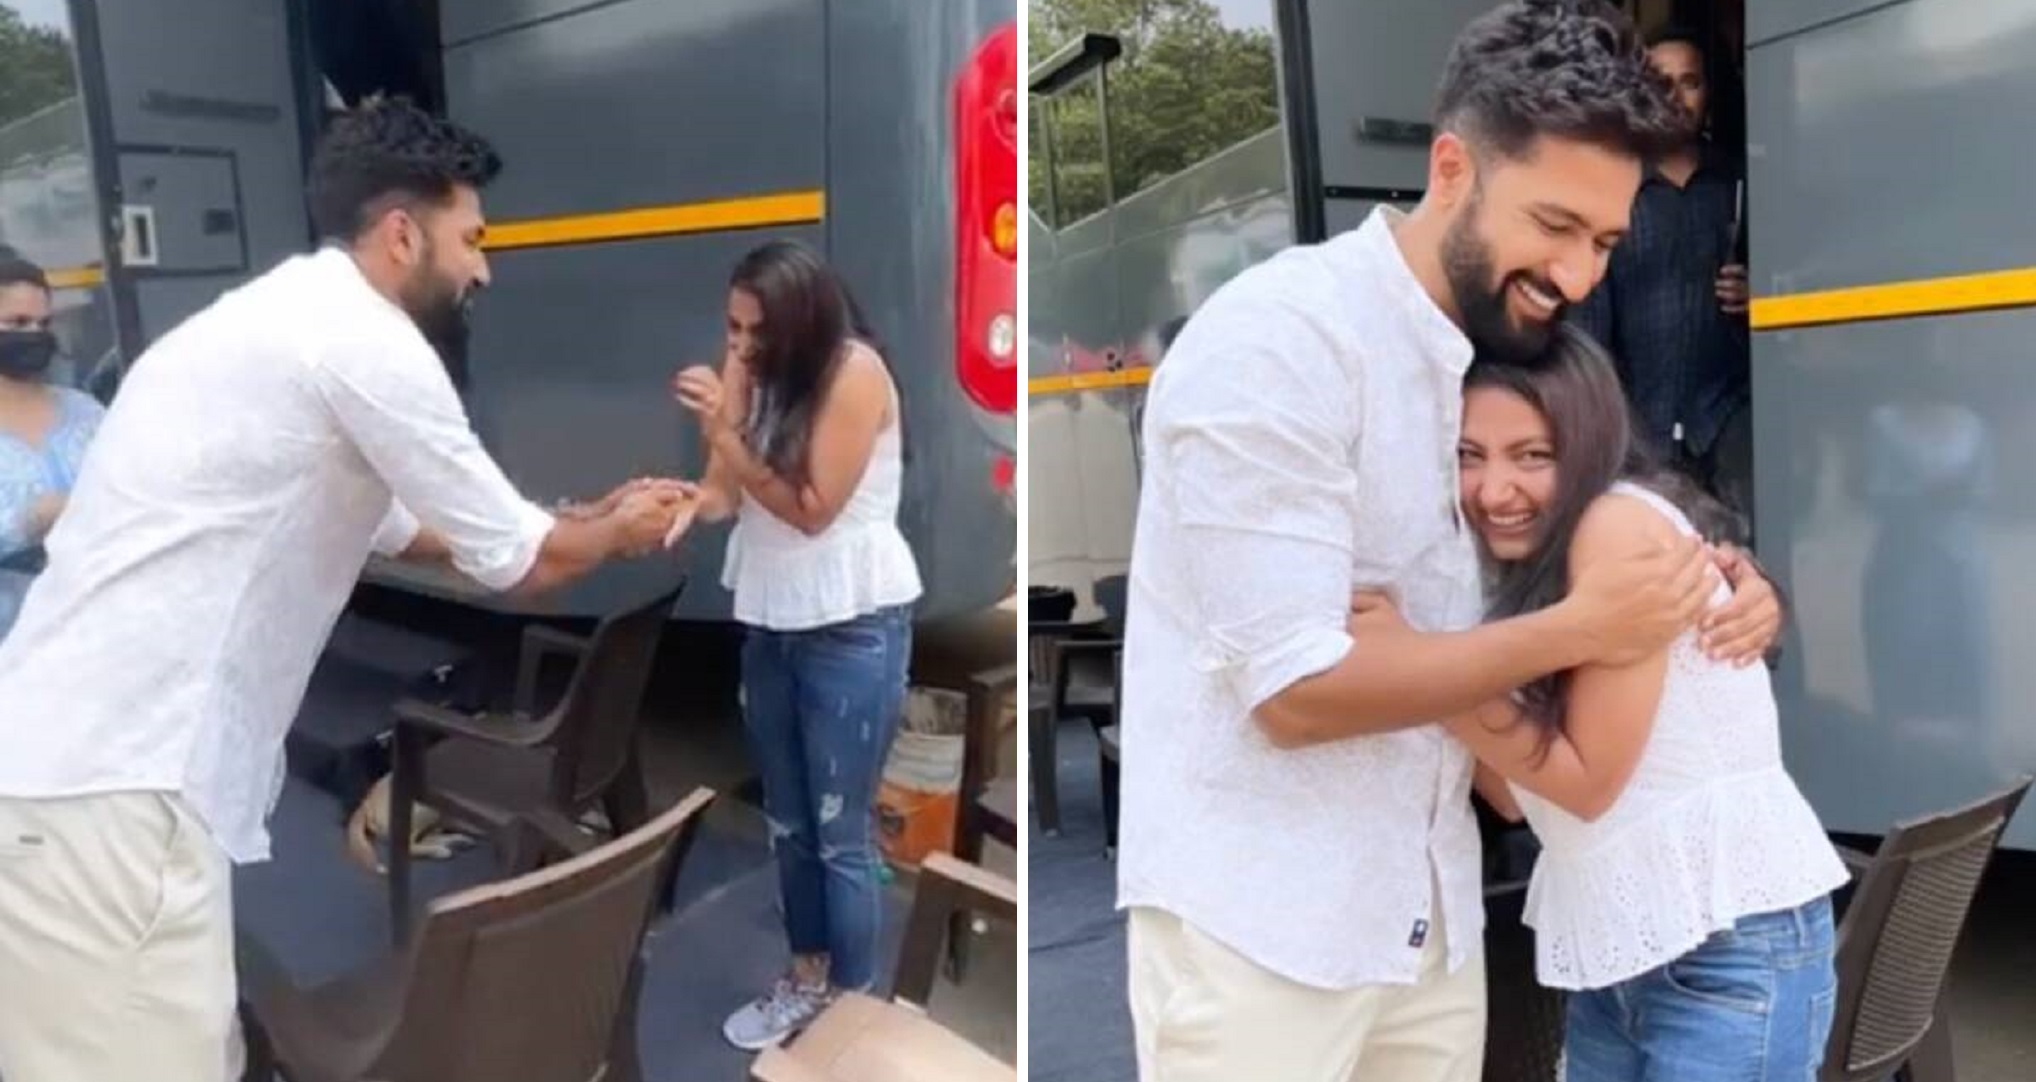 Vicky Kaushal’s Fan Gets Emotional After Meeting The Star, Says ‘Want to tell the world that you are a gem’